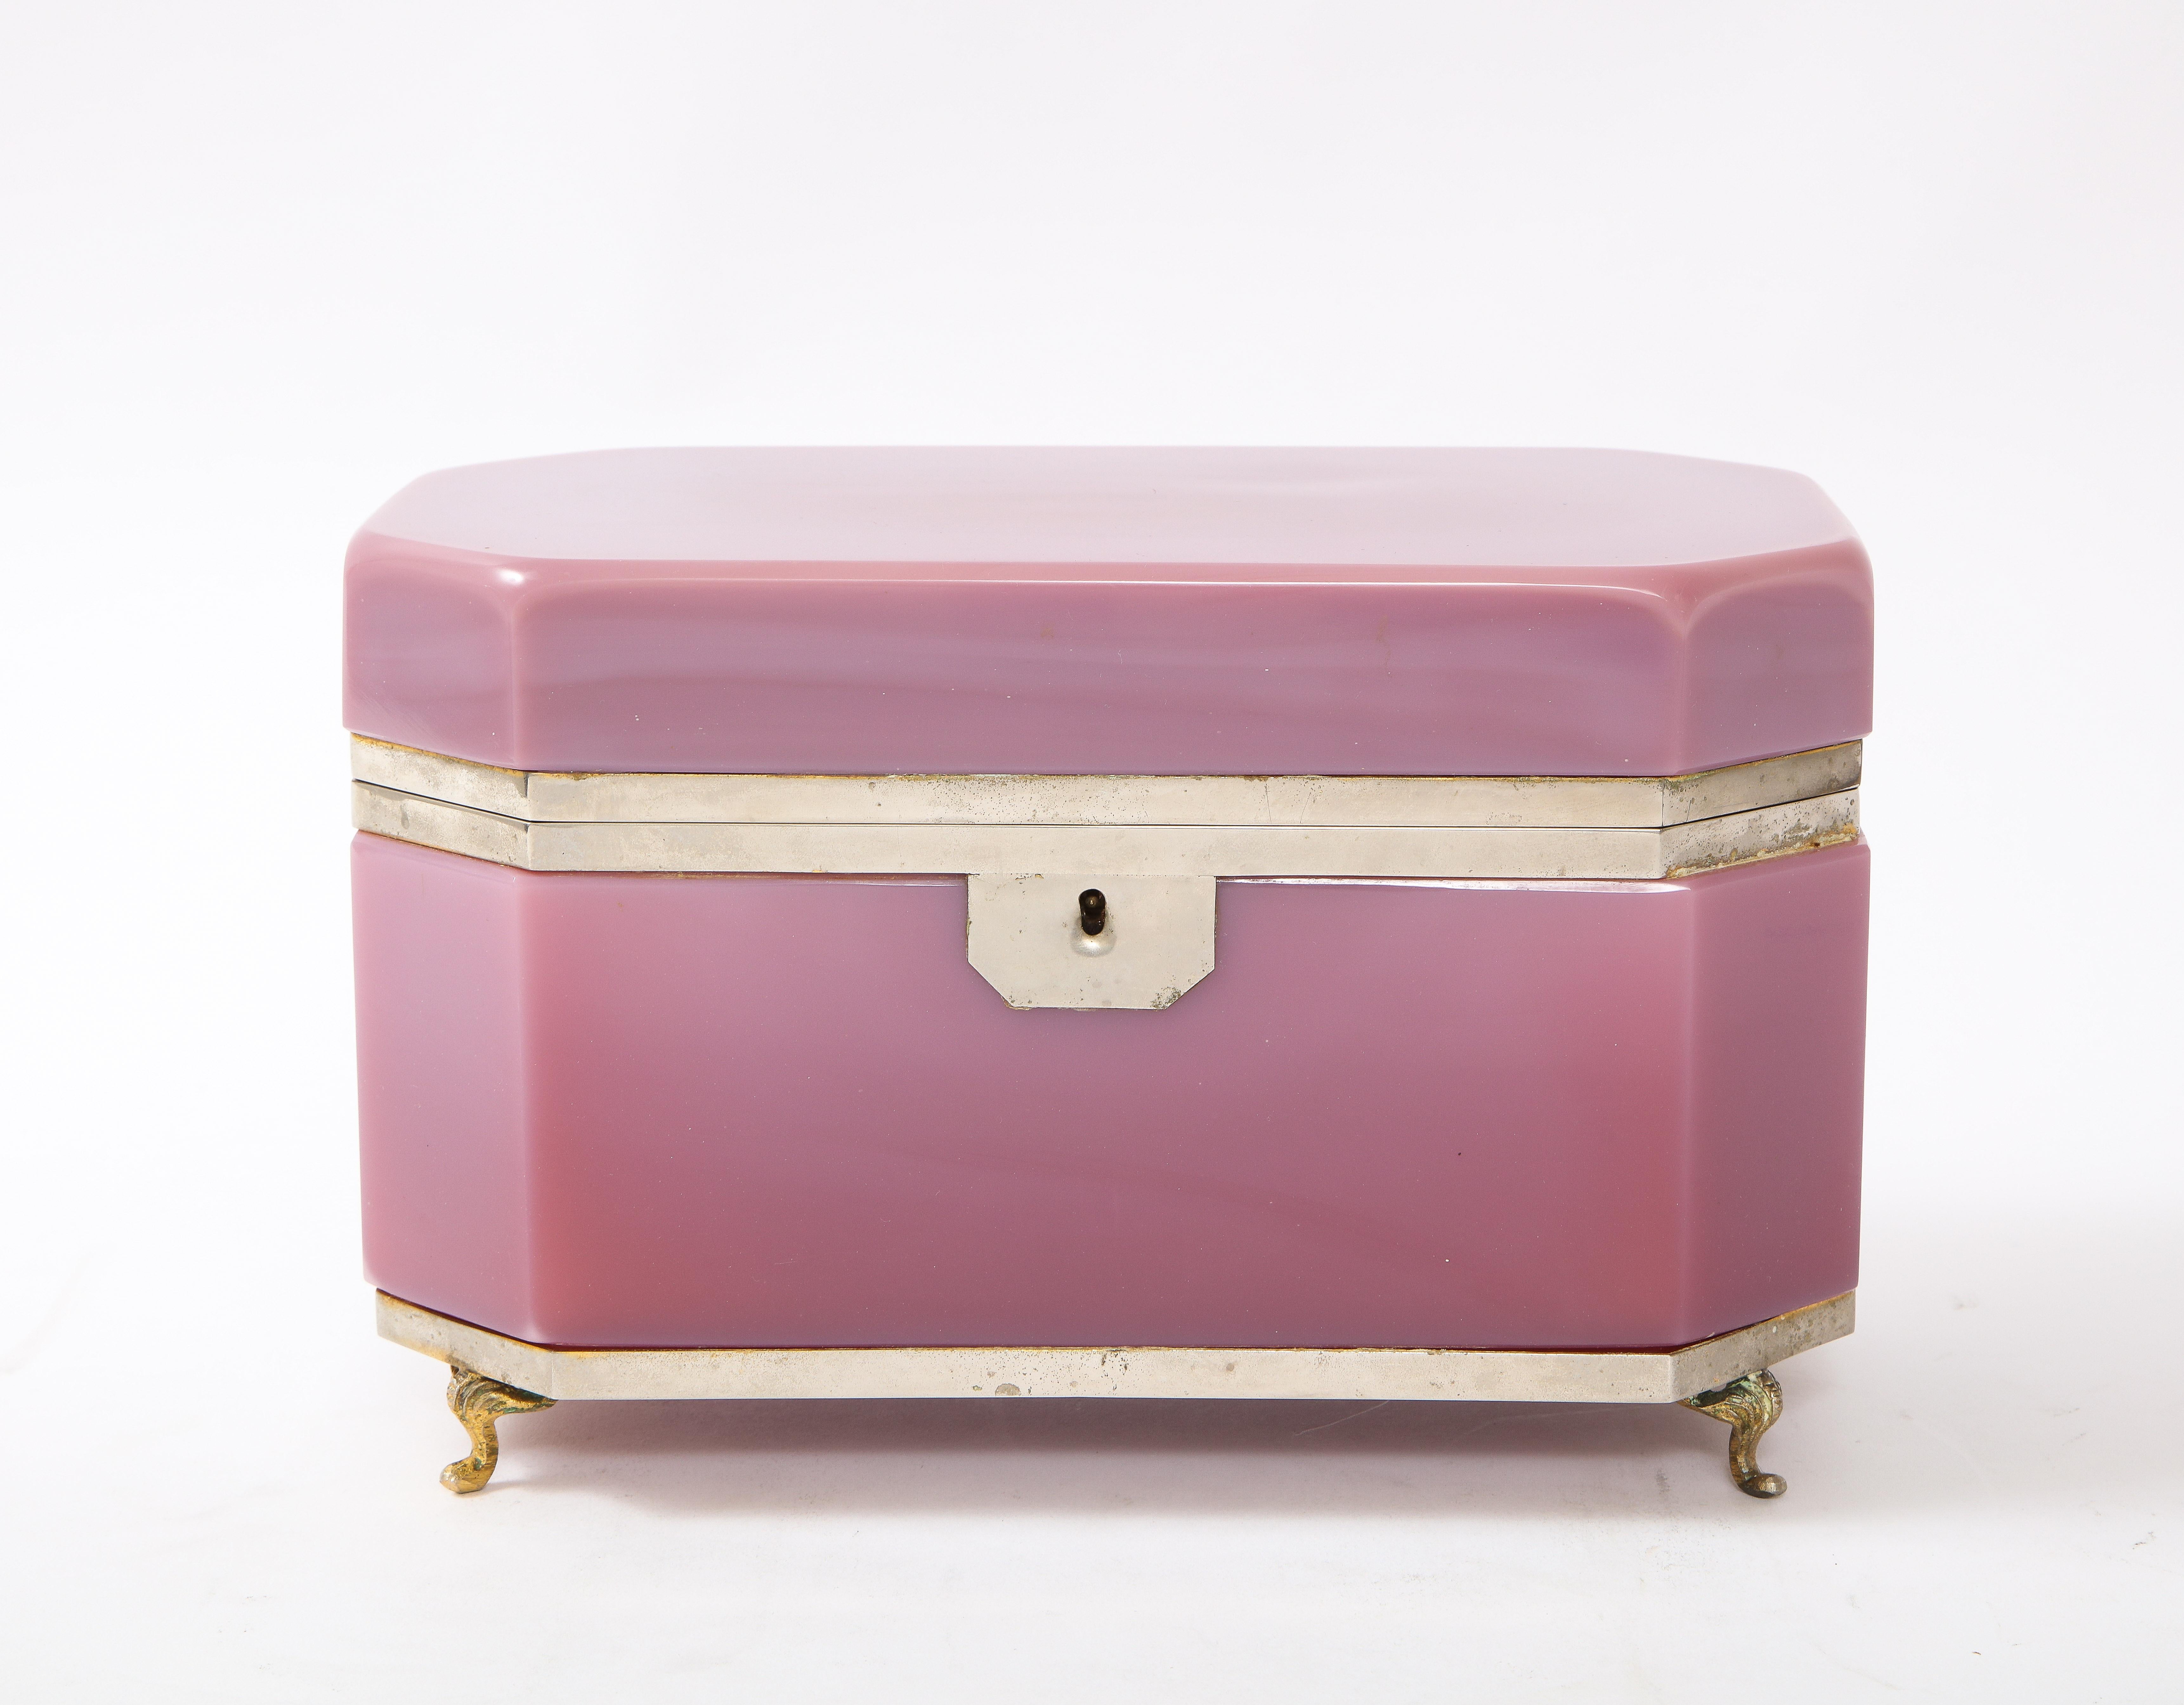 An extremely large 19th century Louis XVI style french silvered bonze mounted pink opalescent dore bronze mounted jewelry box. This box is truly amazing in both size and appearance. This is one of the largest sizes these jewelry boxes were produced